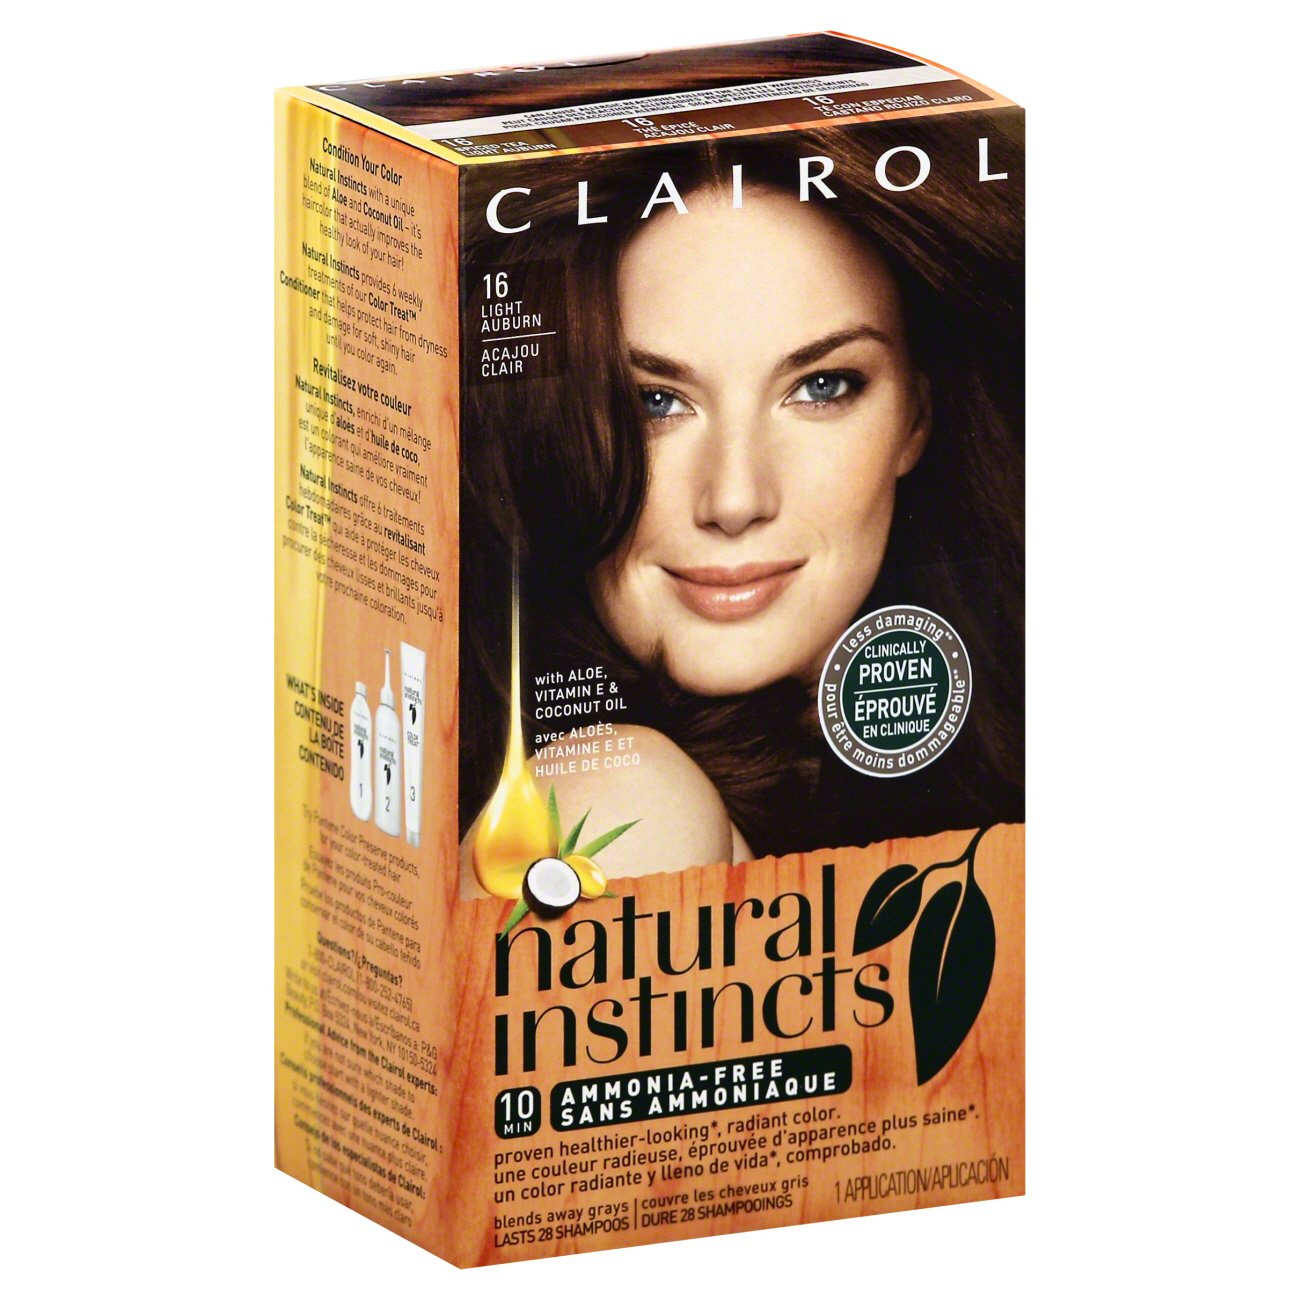 Clairol Natural Instincts 16 Spice Tea Light Auburn Shop Clairol Natural Instincts 16 Spice Tea Light Auburn Shop Clairol Natural Instincts 16 Spice Tea Light Auburn Shop Clairol Natural,60th Wedding Anniversary Gifts For Parents